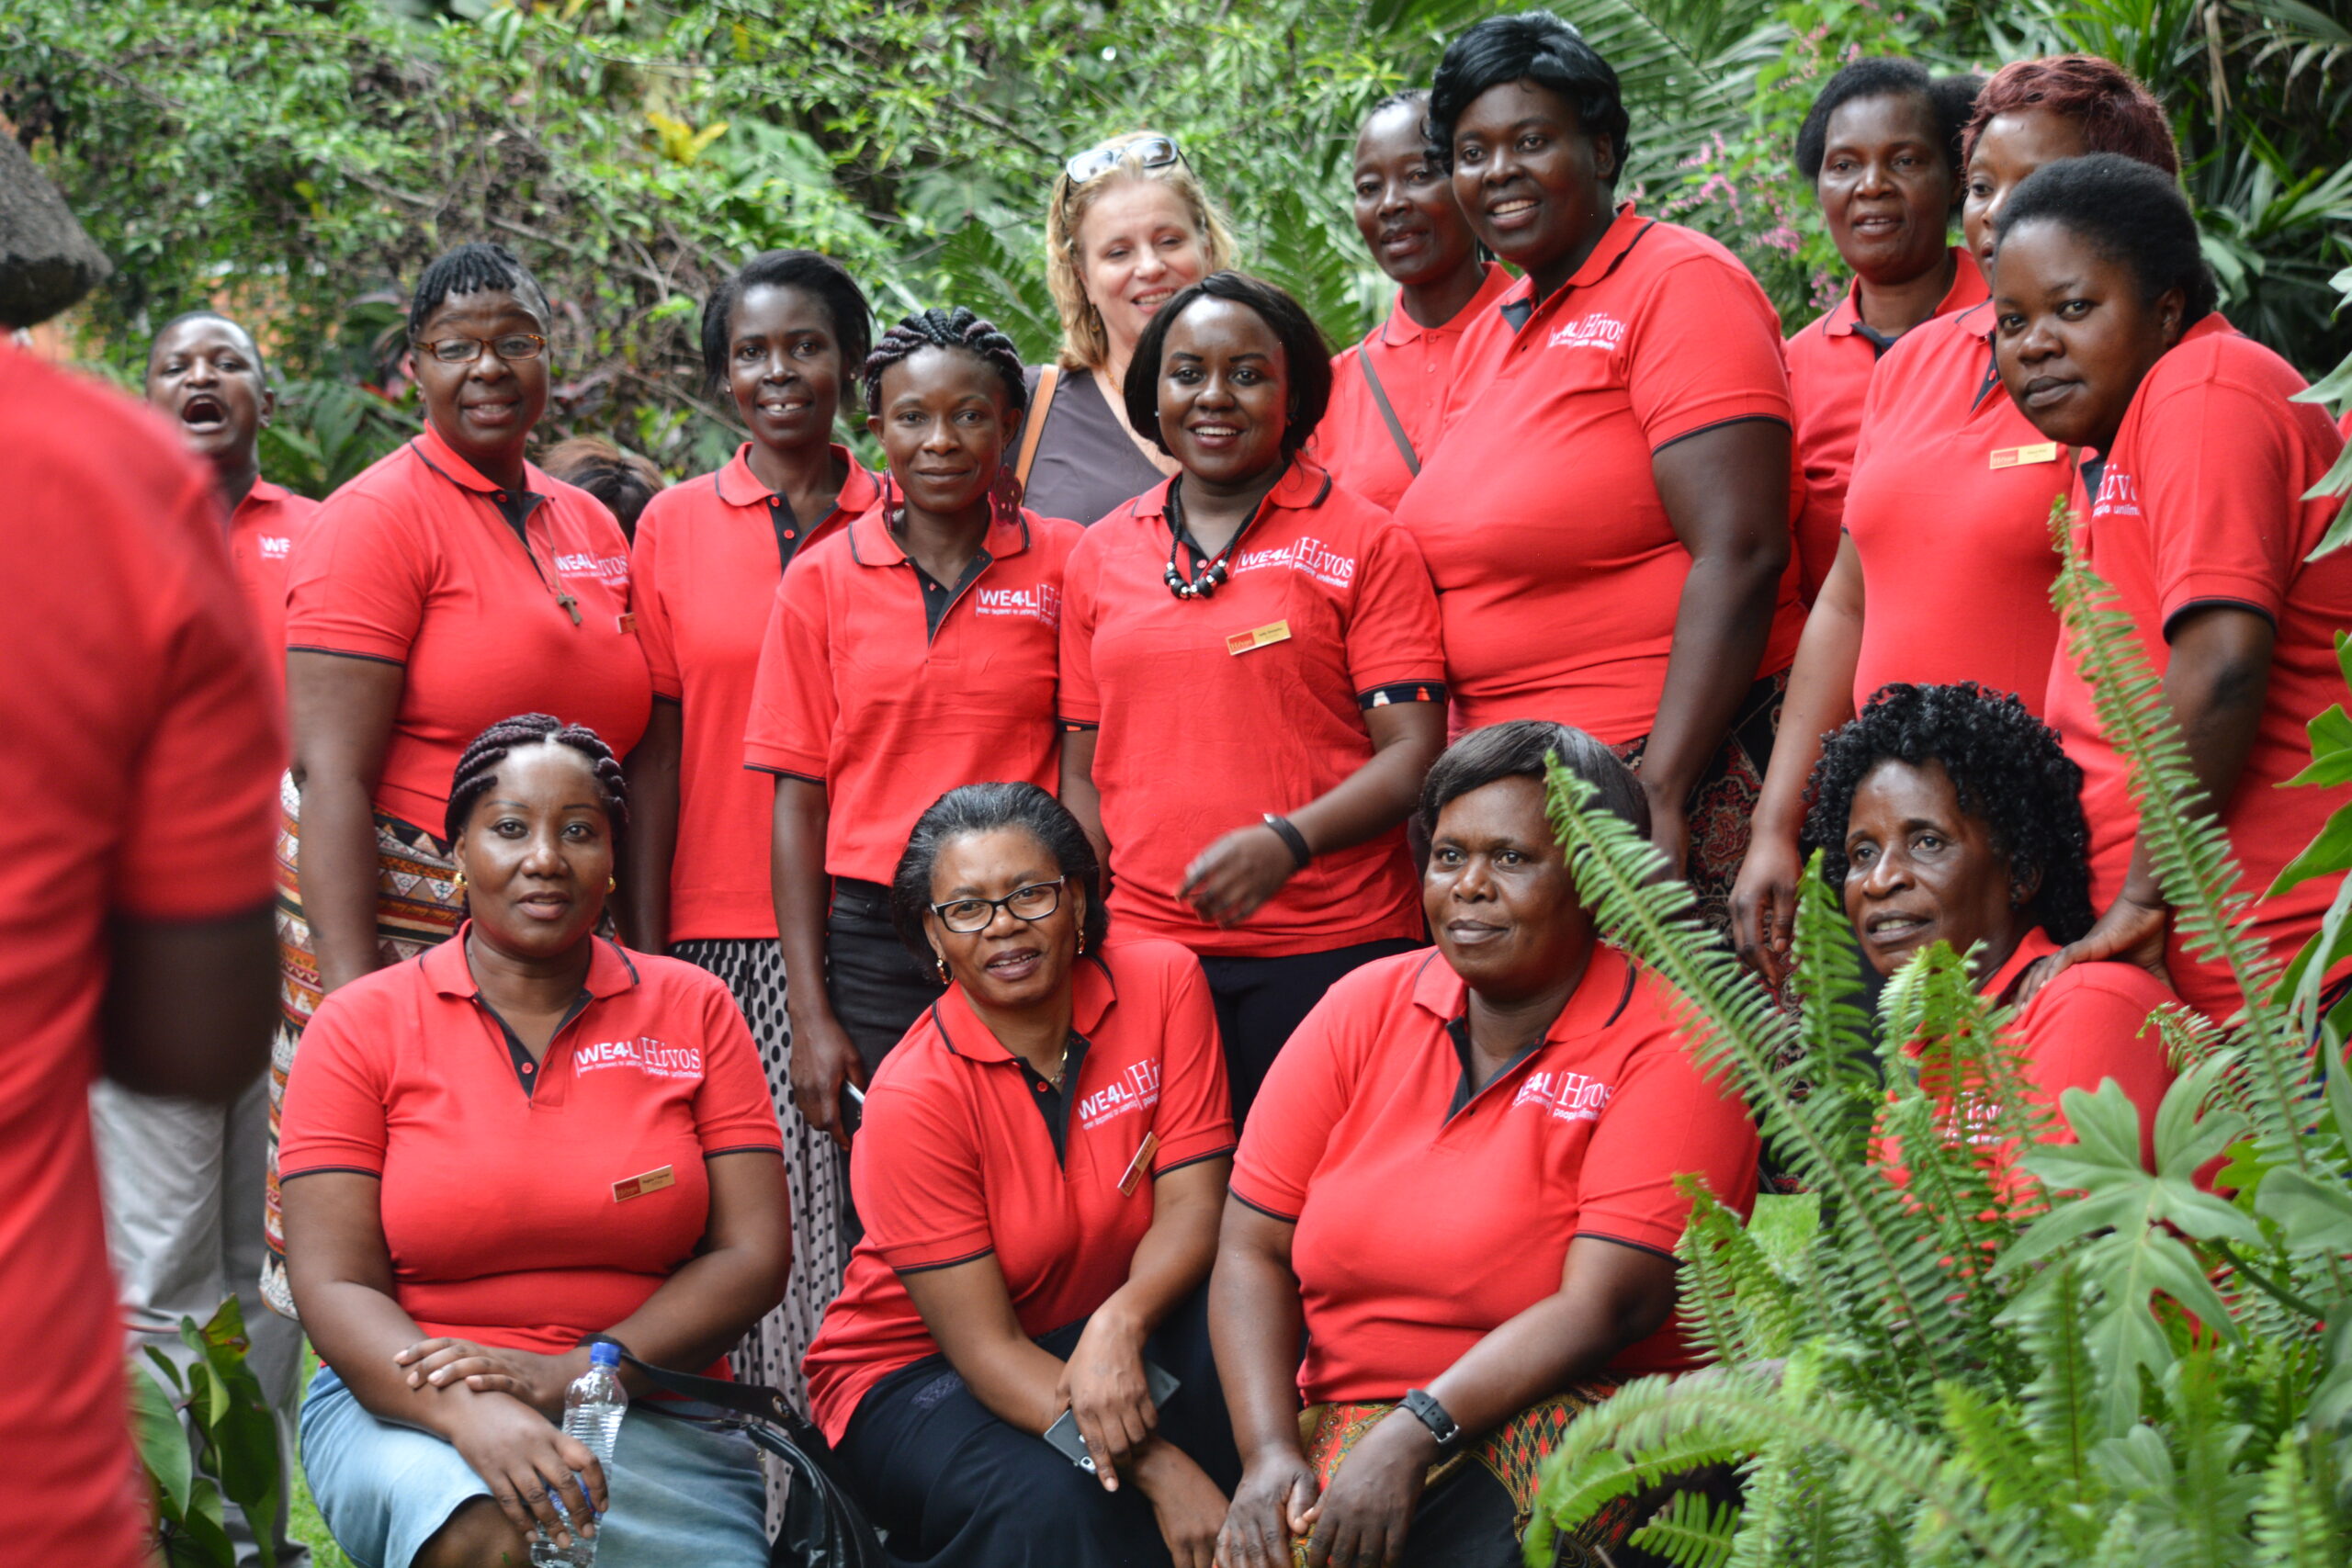 Zambian aspiring female councilors ready to take on their male counterparts